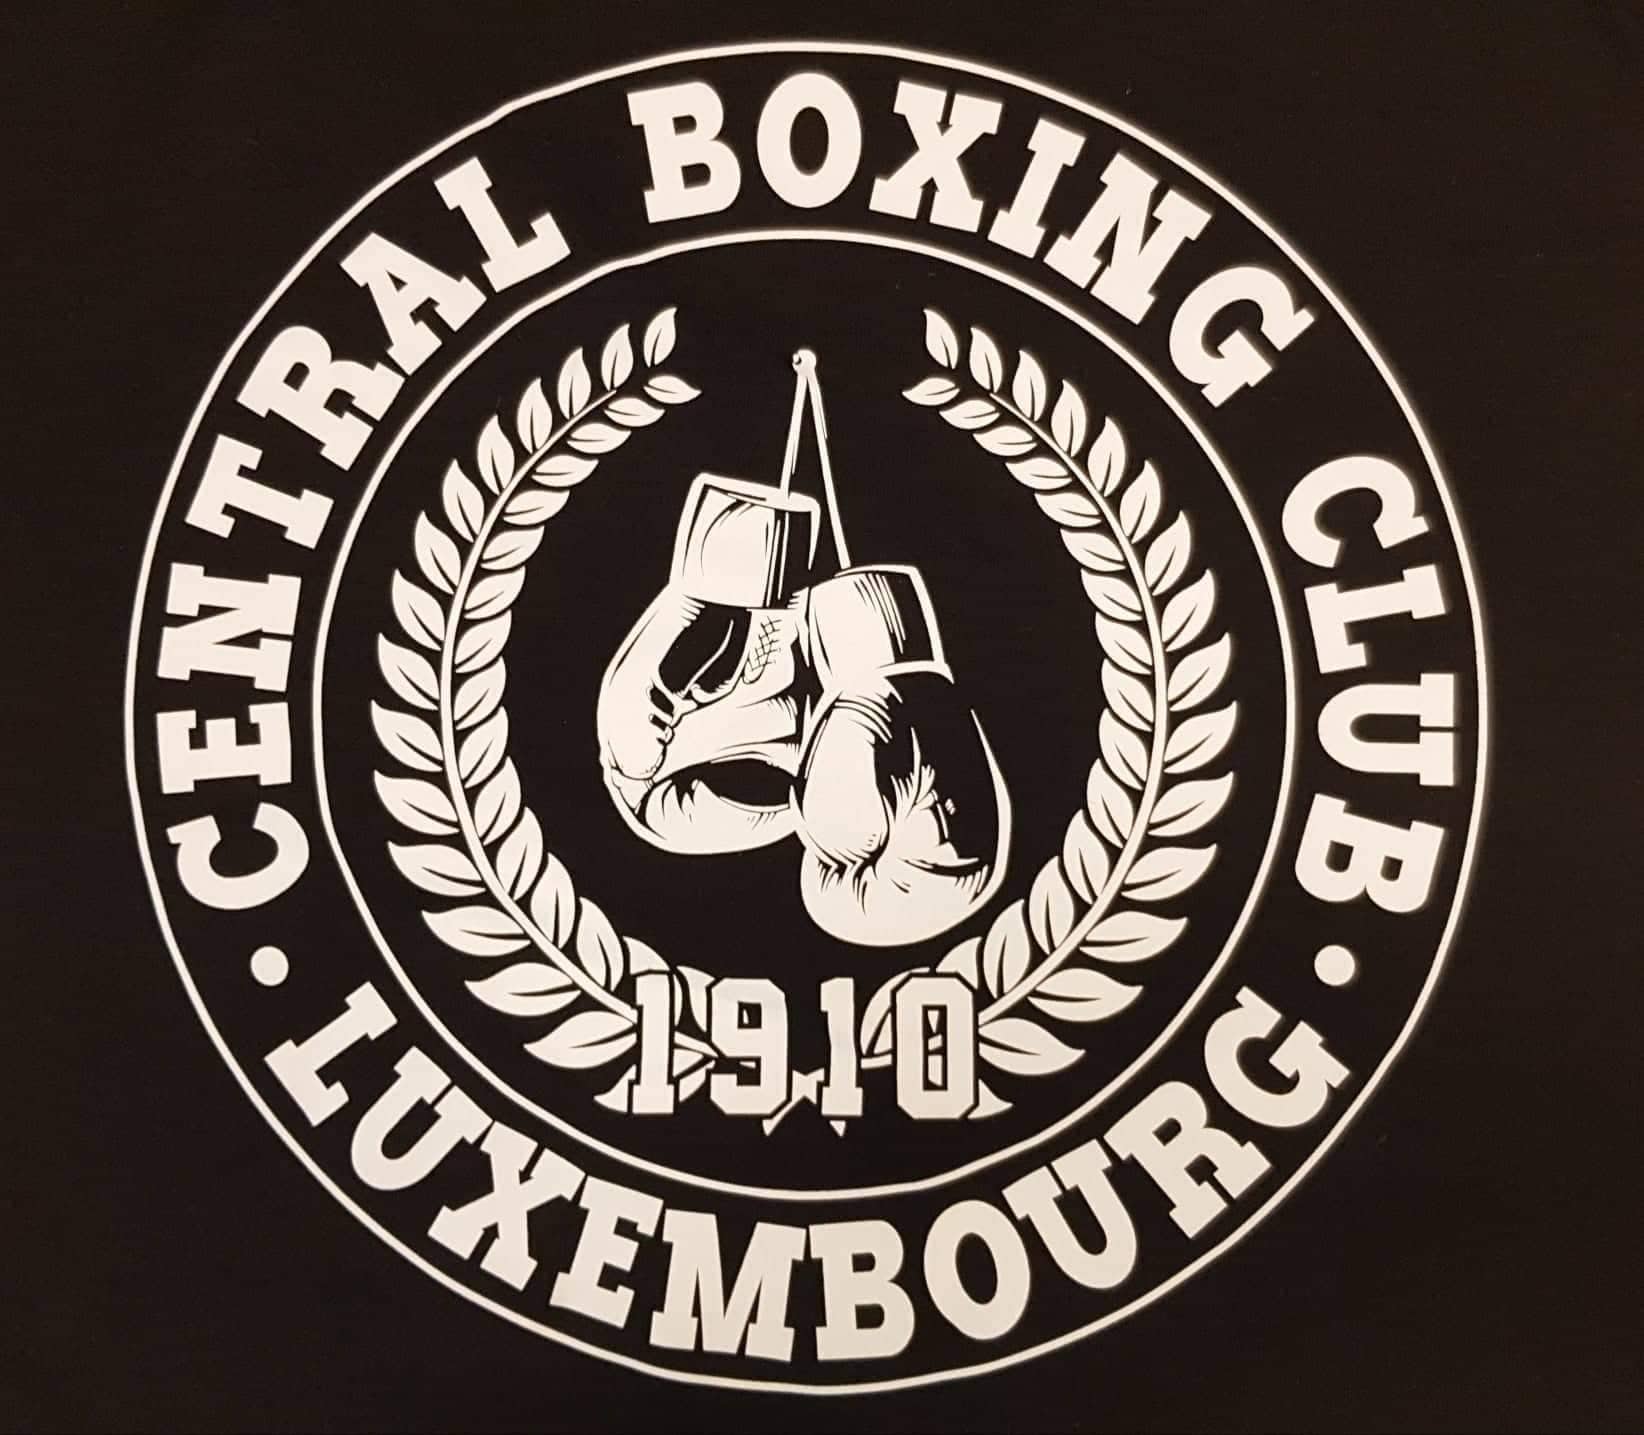 CENTRAL BOXING CLUB